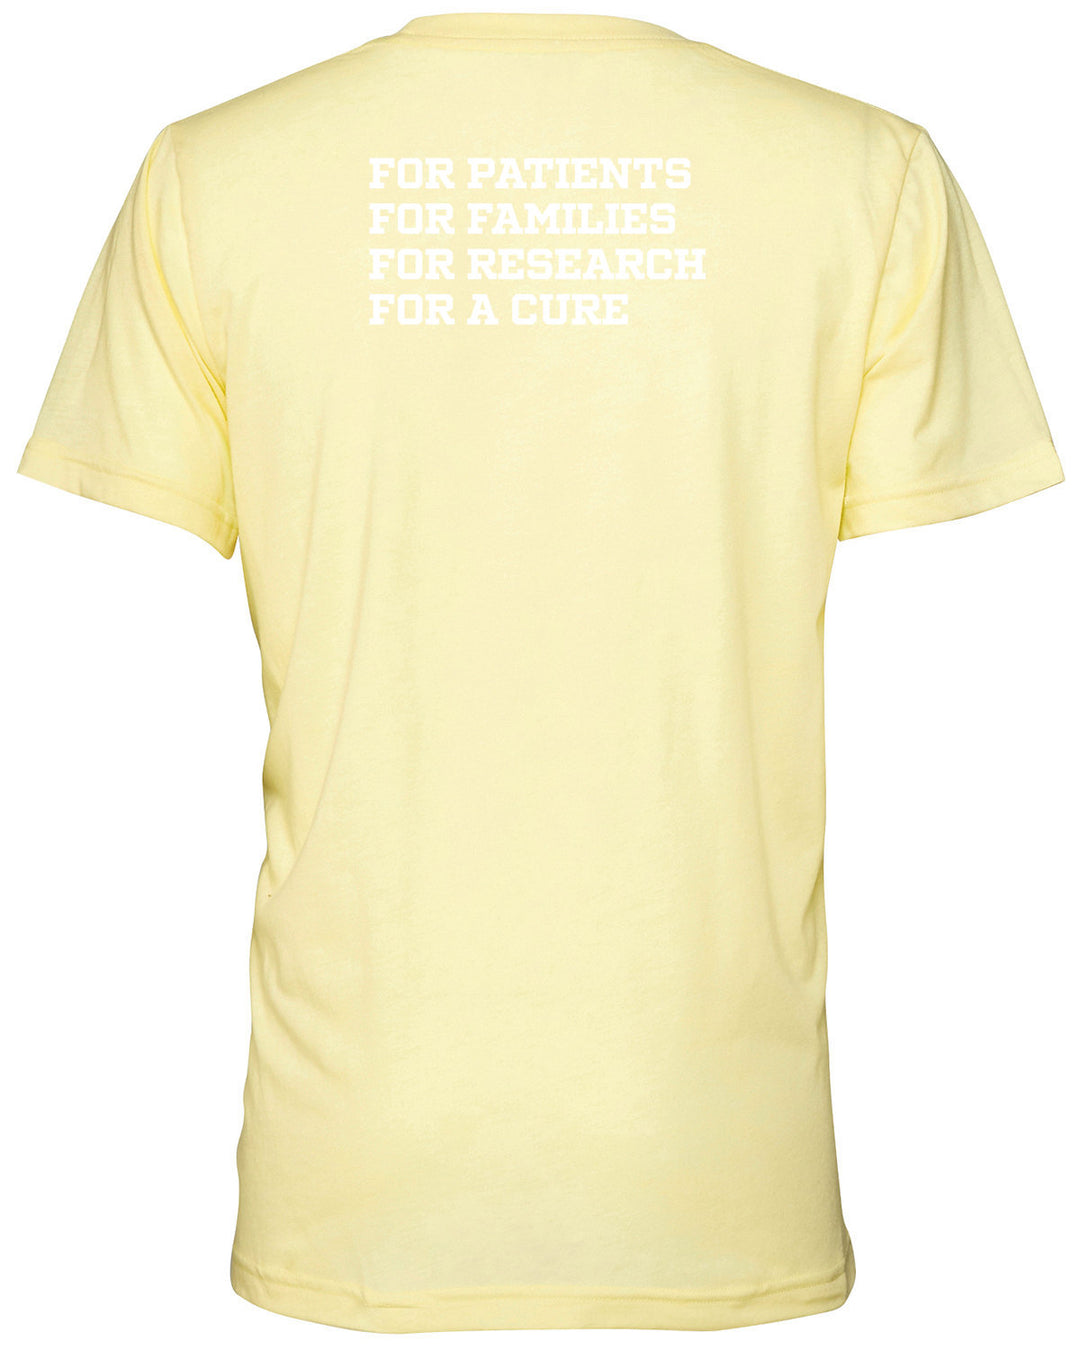 Caring for a Cure Unisex Triblend T-Shirt (3413C)